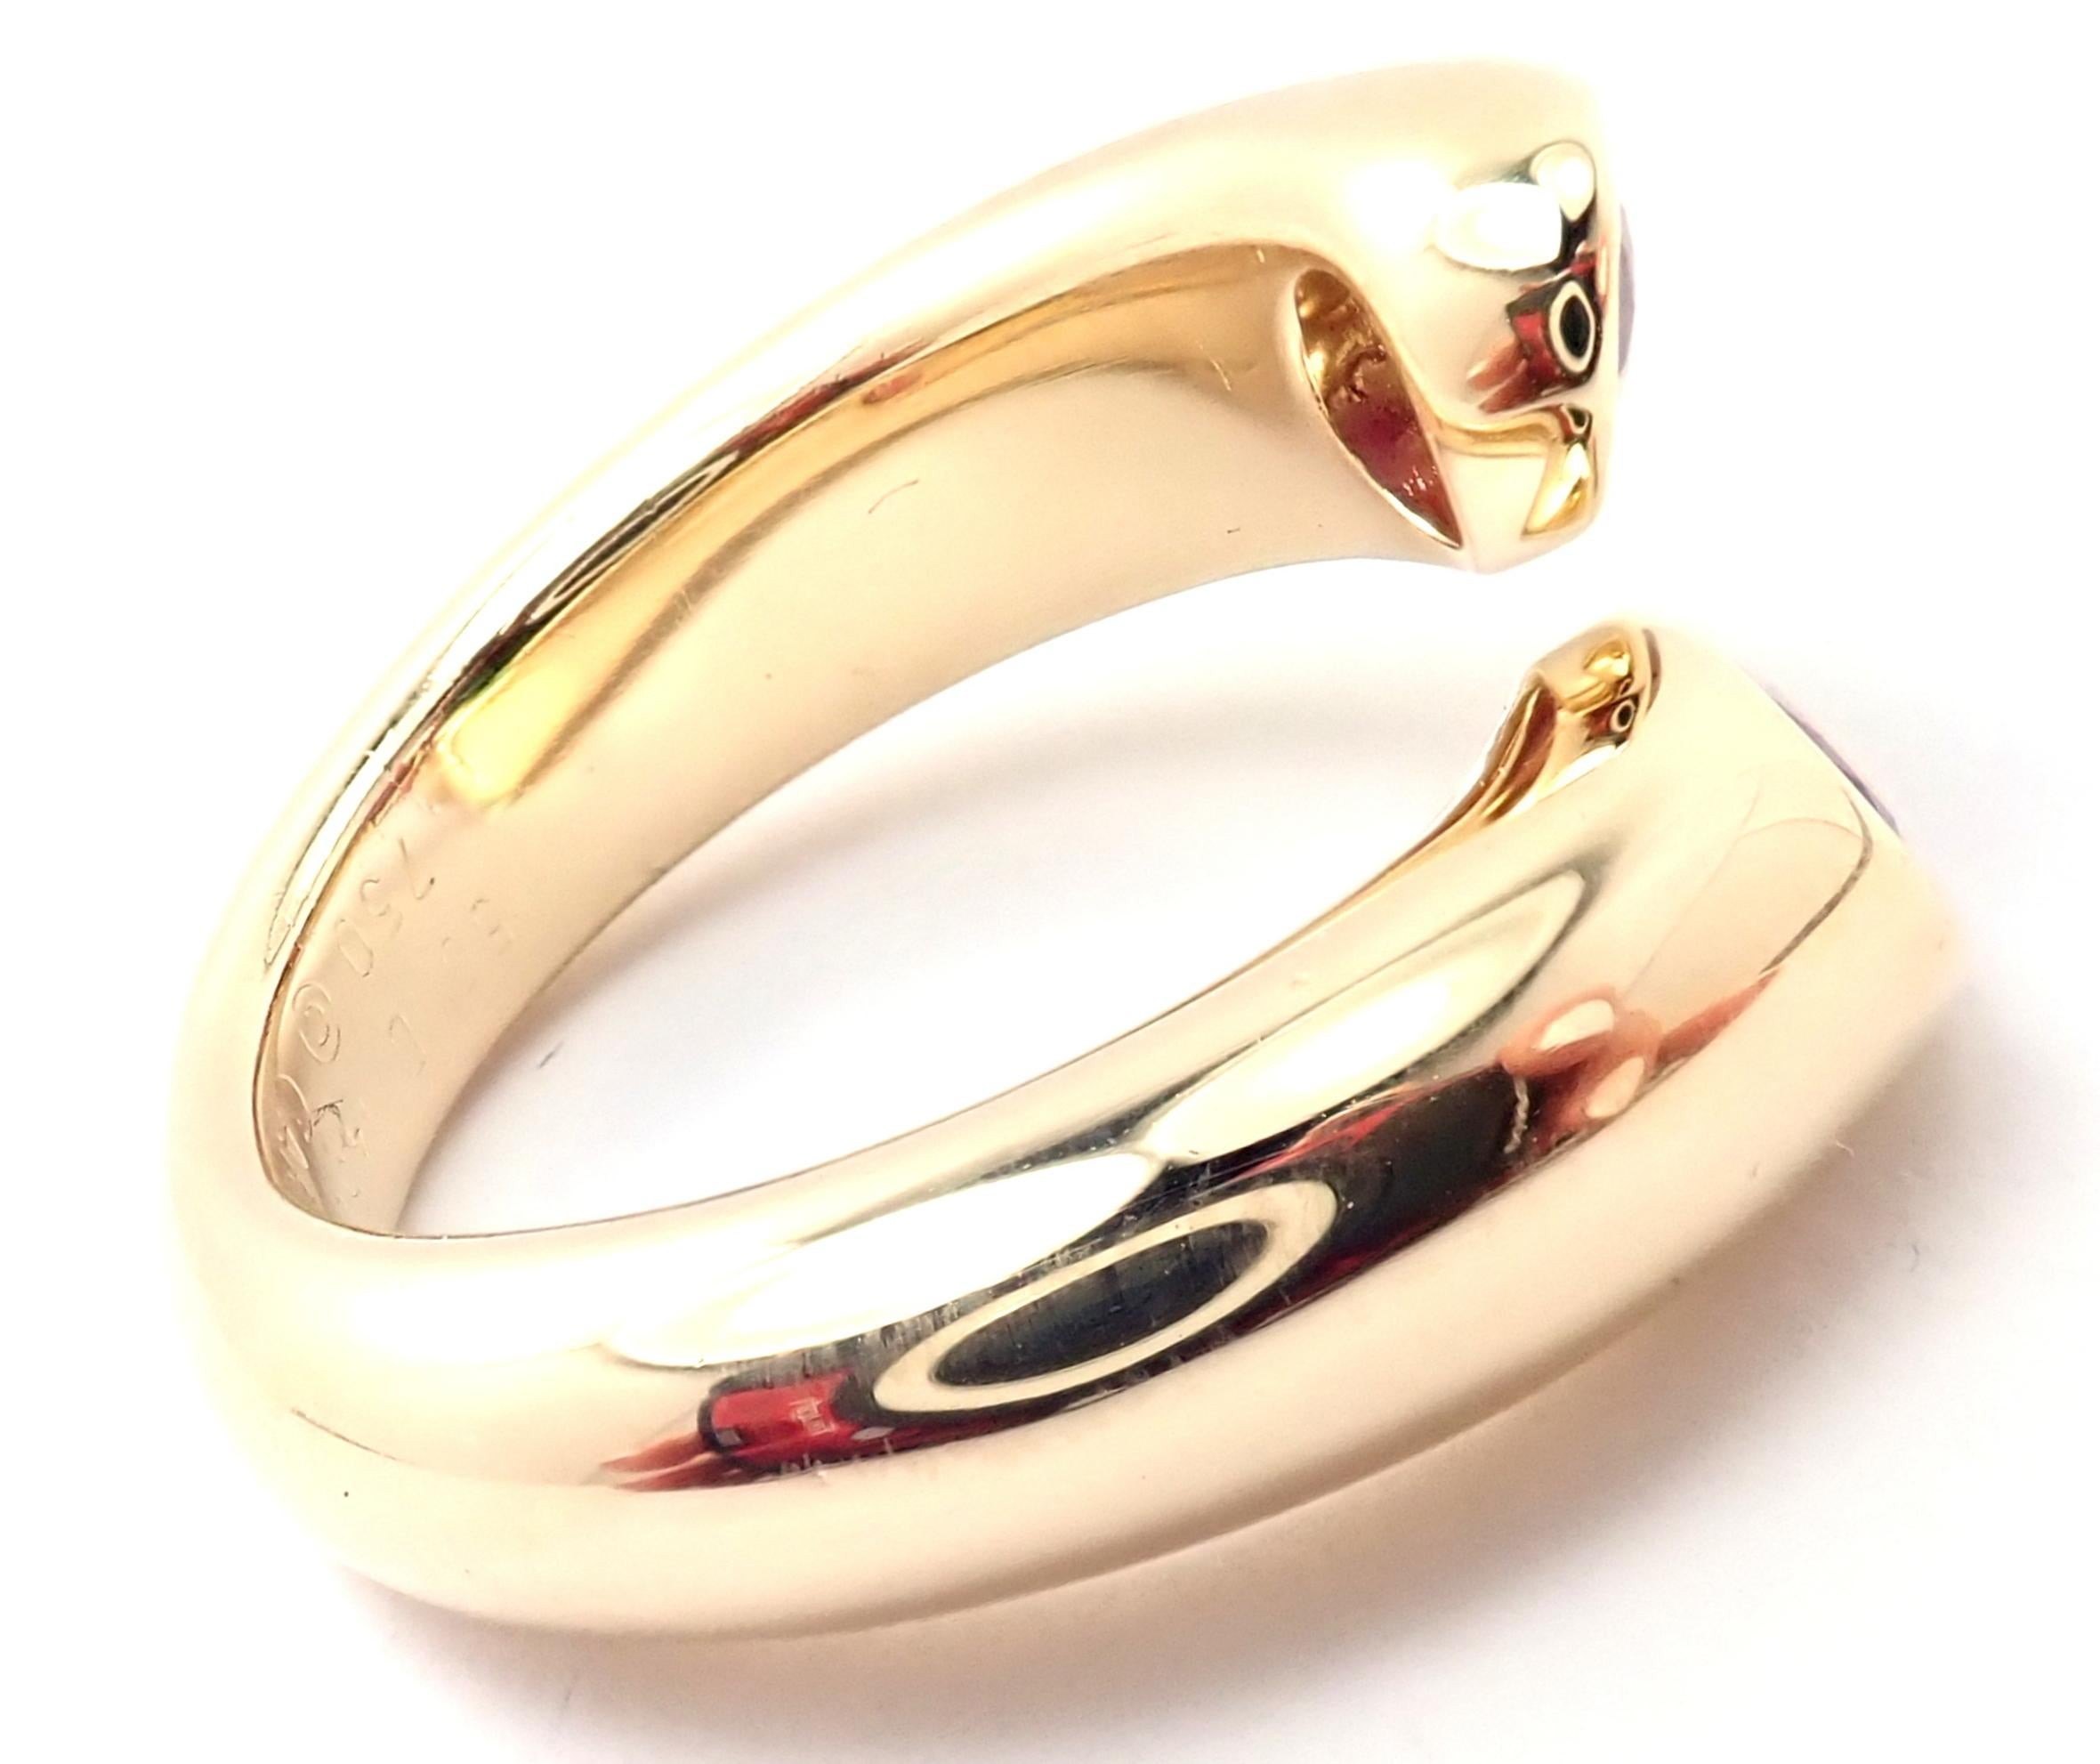 18k Yellow Gold Ellipse Deux Tetes Croisees Bypass Ruby Band Ring by Cartier.
With 2 oval cut rubies, approx 1.20ct
Metal: 18k Yellow Gold
Band Width: 9mm
Weight:   11.3 grams
Size:	5 1/2 US, Europe 50
Hallmarks: Cartier 750 50, 1995 D14505
YOUR